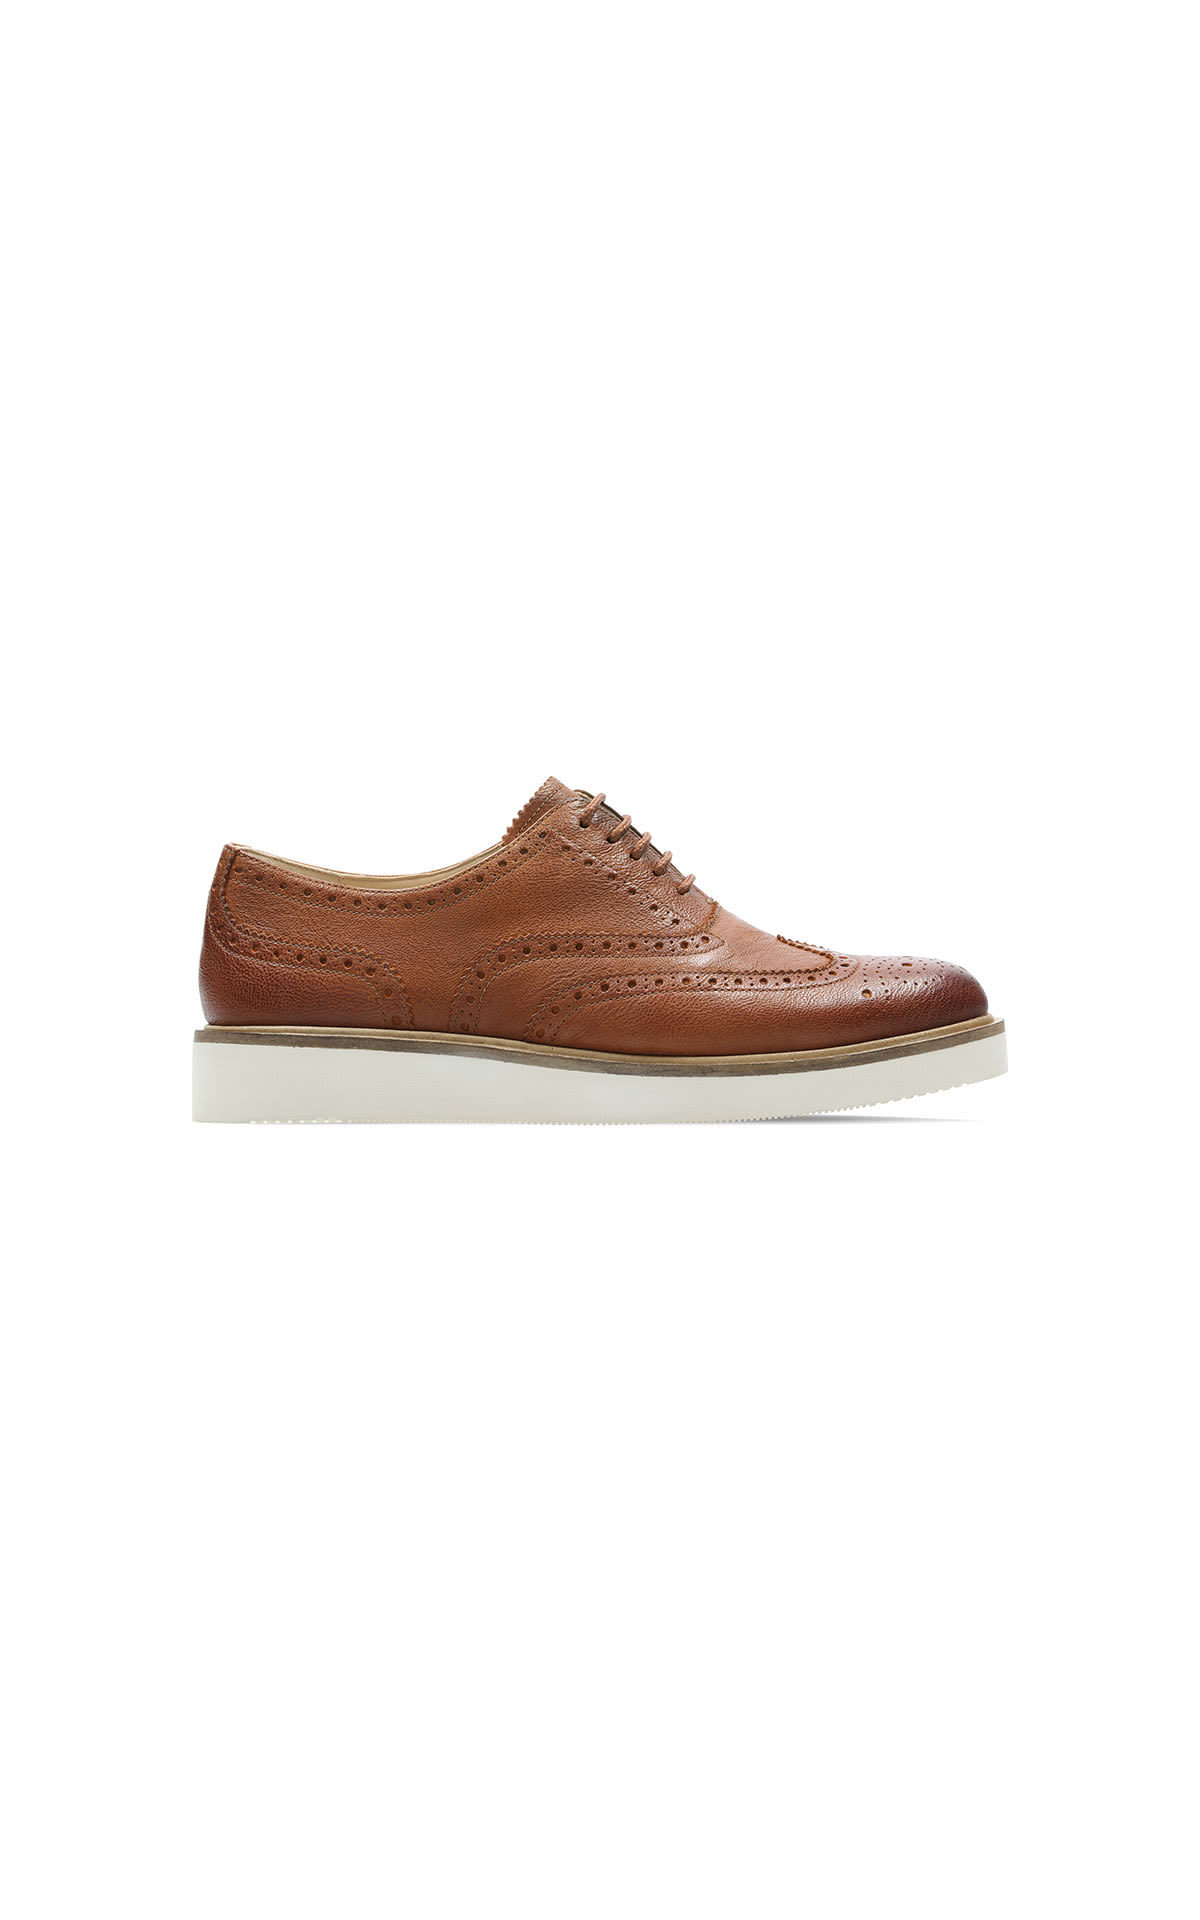 Clarks Glickly brogue tan from Bicester Village